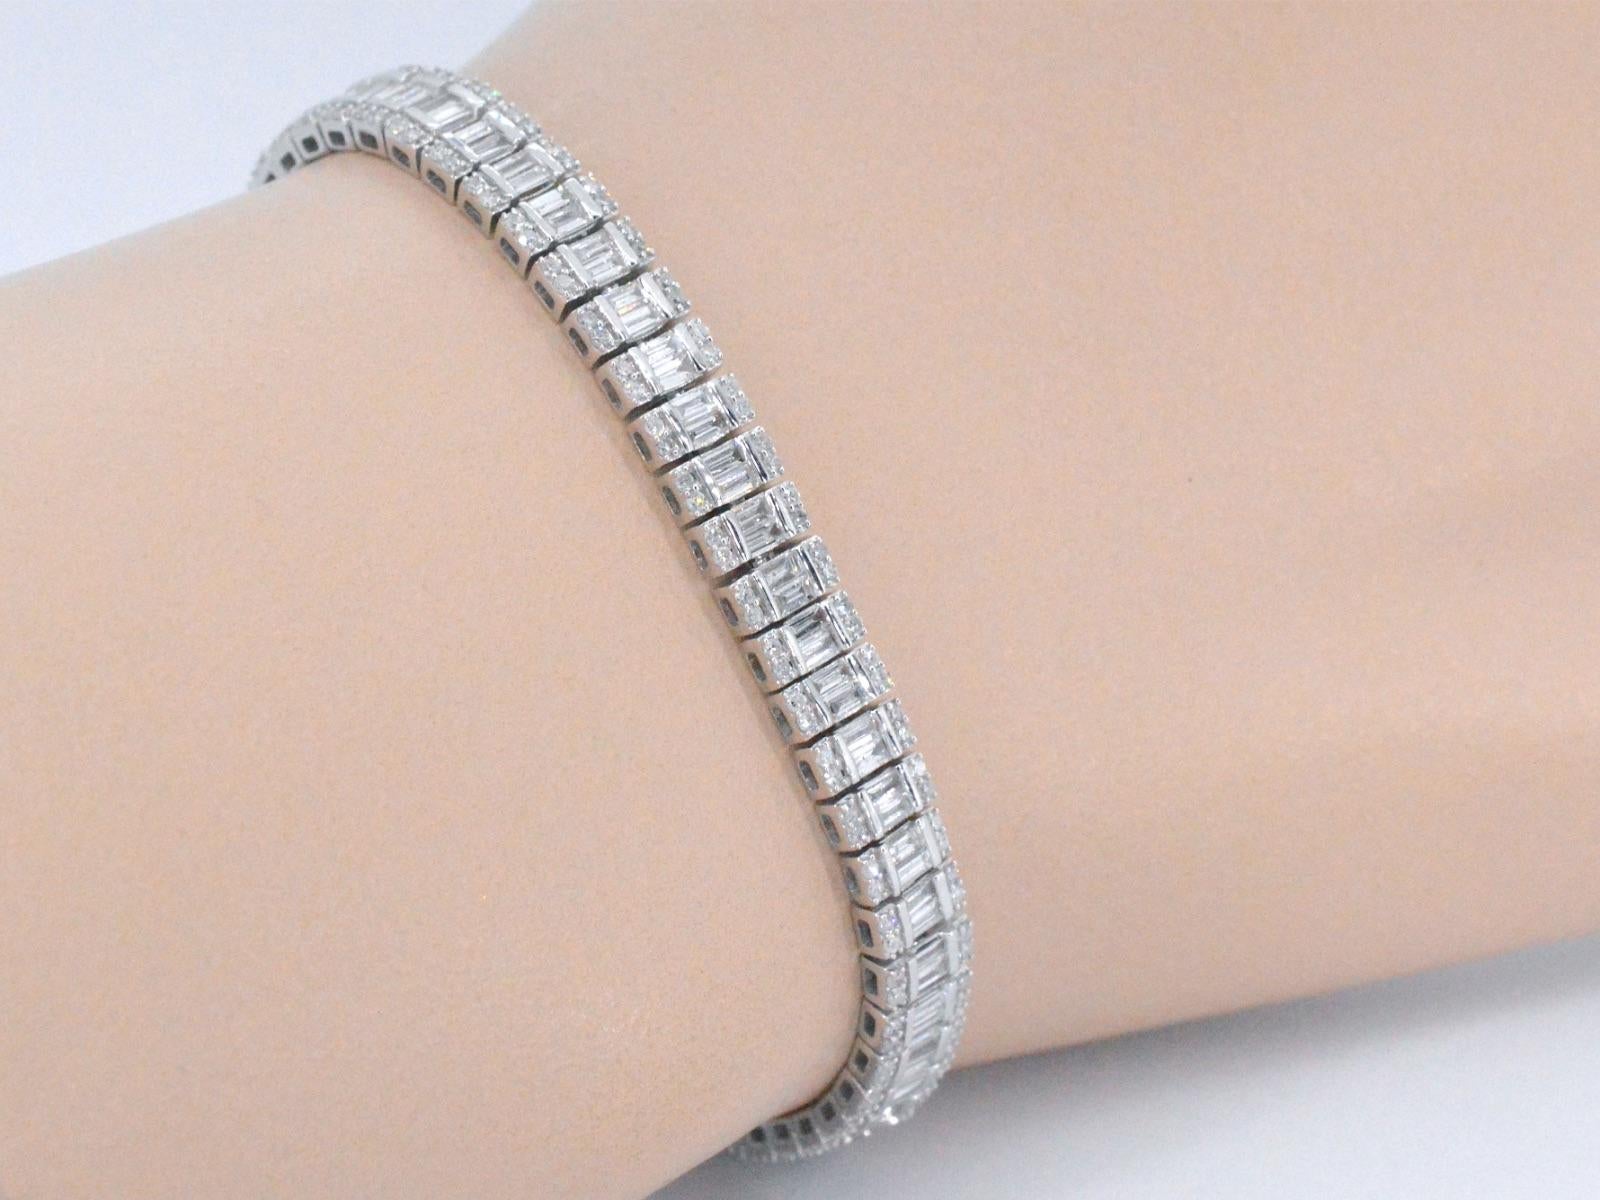 This 14K white gold bracelet is a stunning piece of jewelry that is fully set with diamonds, totaling 4.50 carat in weight. The white gold is a high-quality metal known for its strength and durability, while the diamonds are carefully selected for